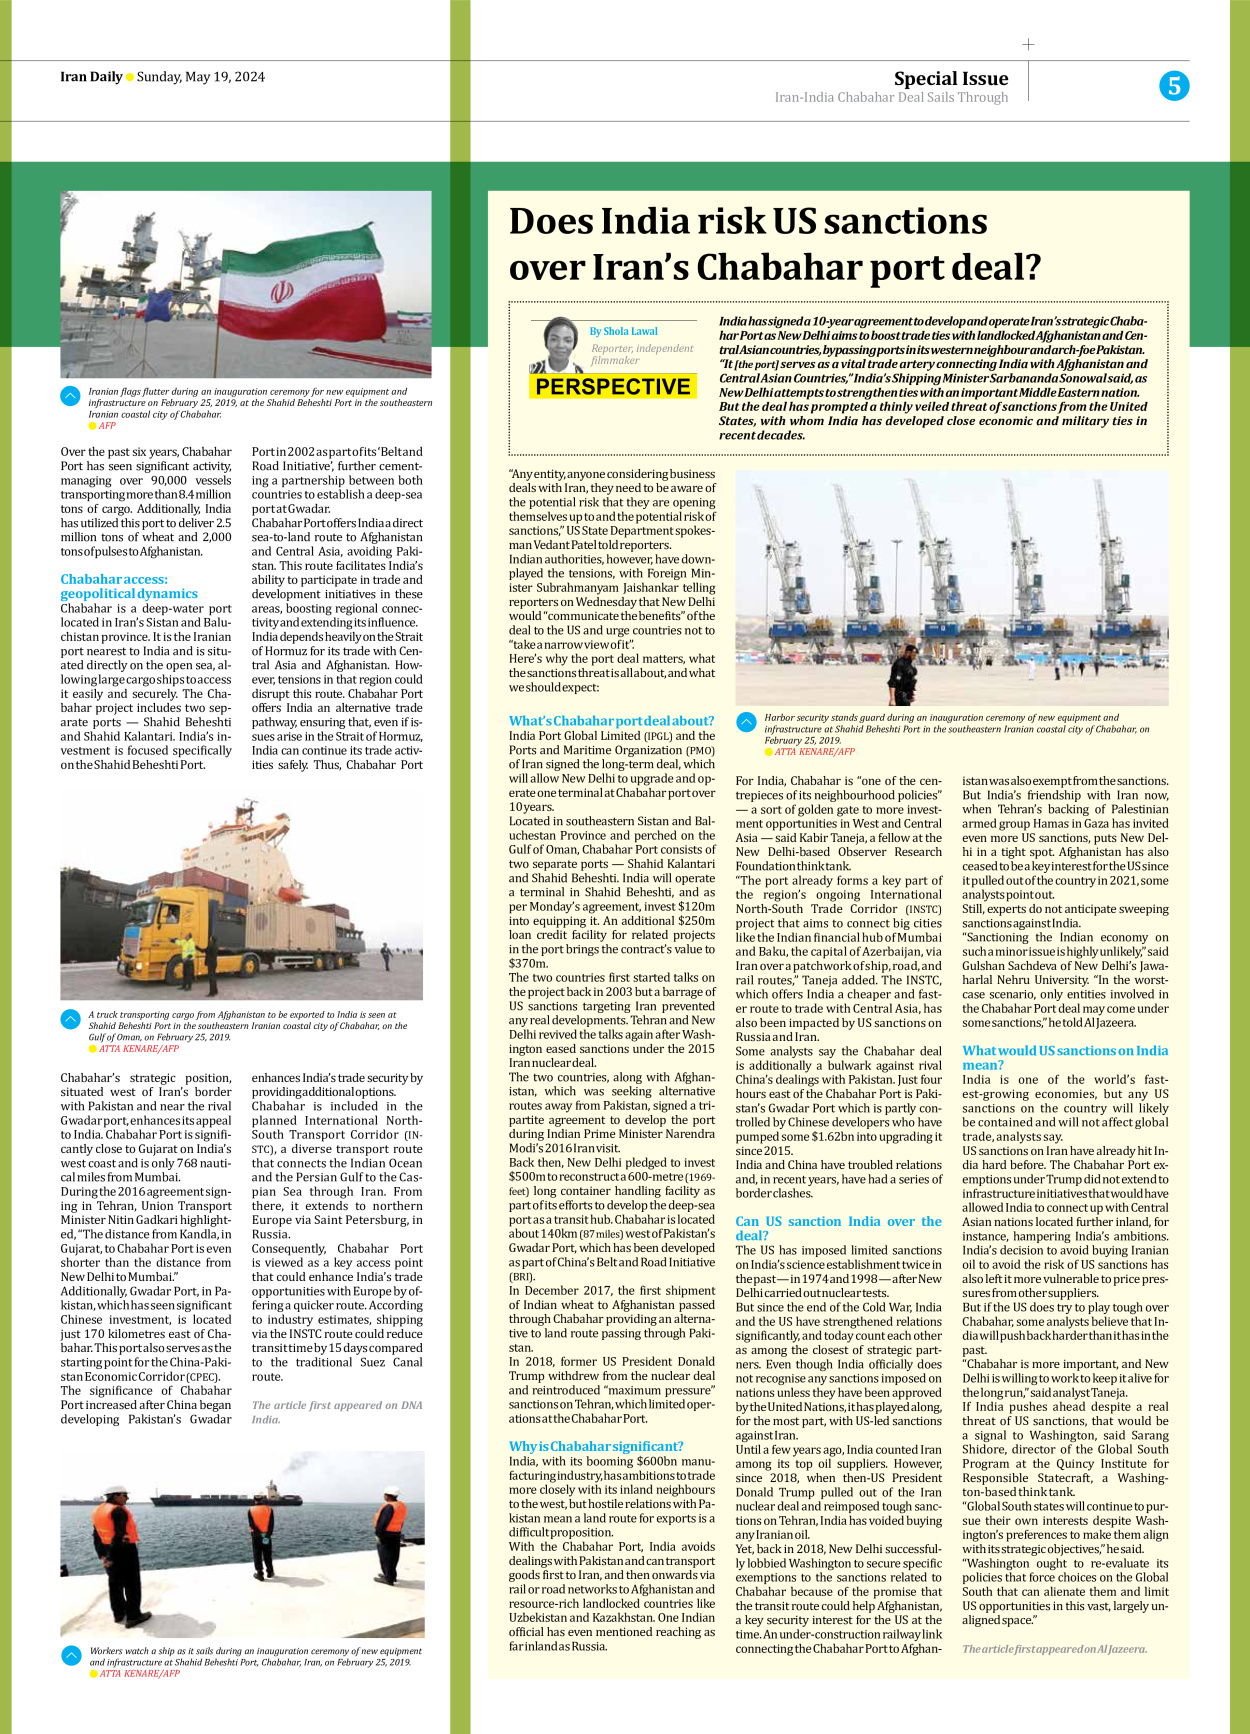 Iran Daily - Number Seven Thousand Five Hundred and Sixty One - 19 May 2024 - Page 5